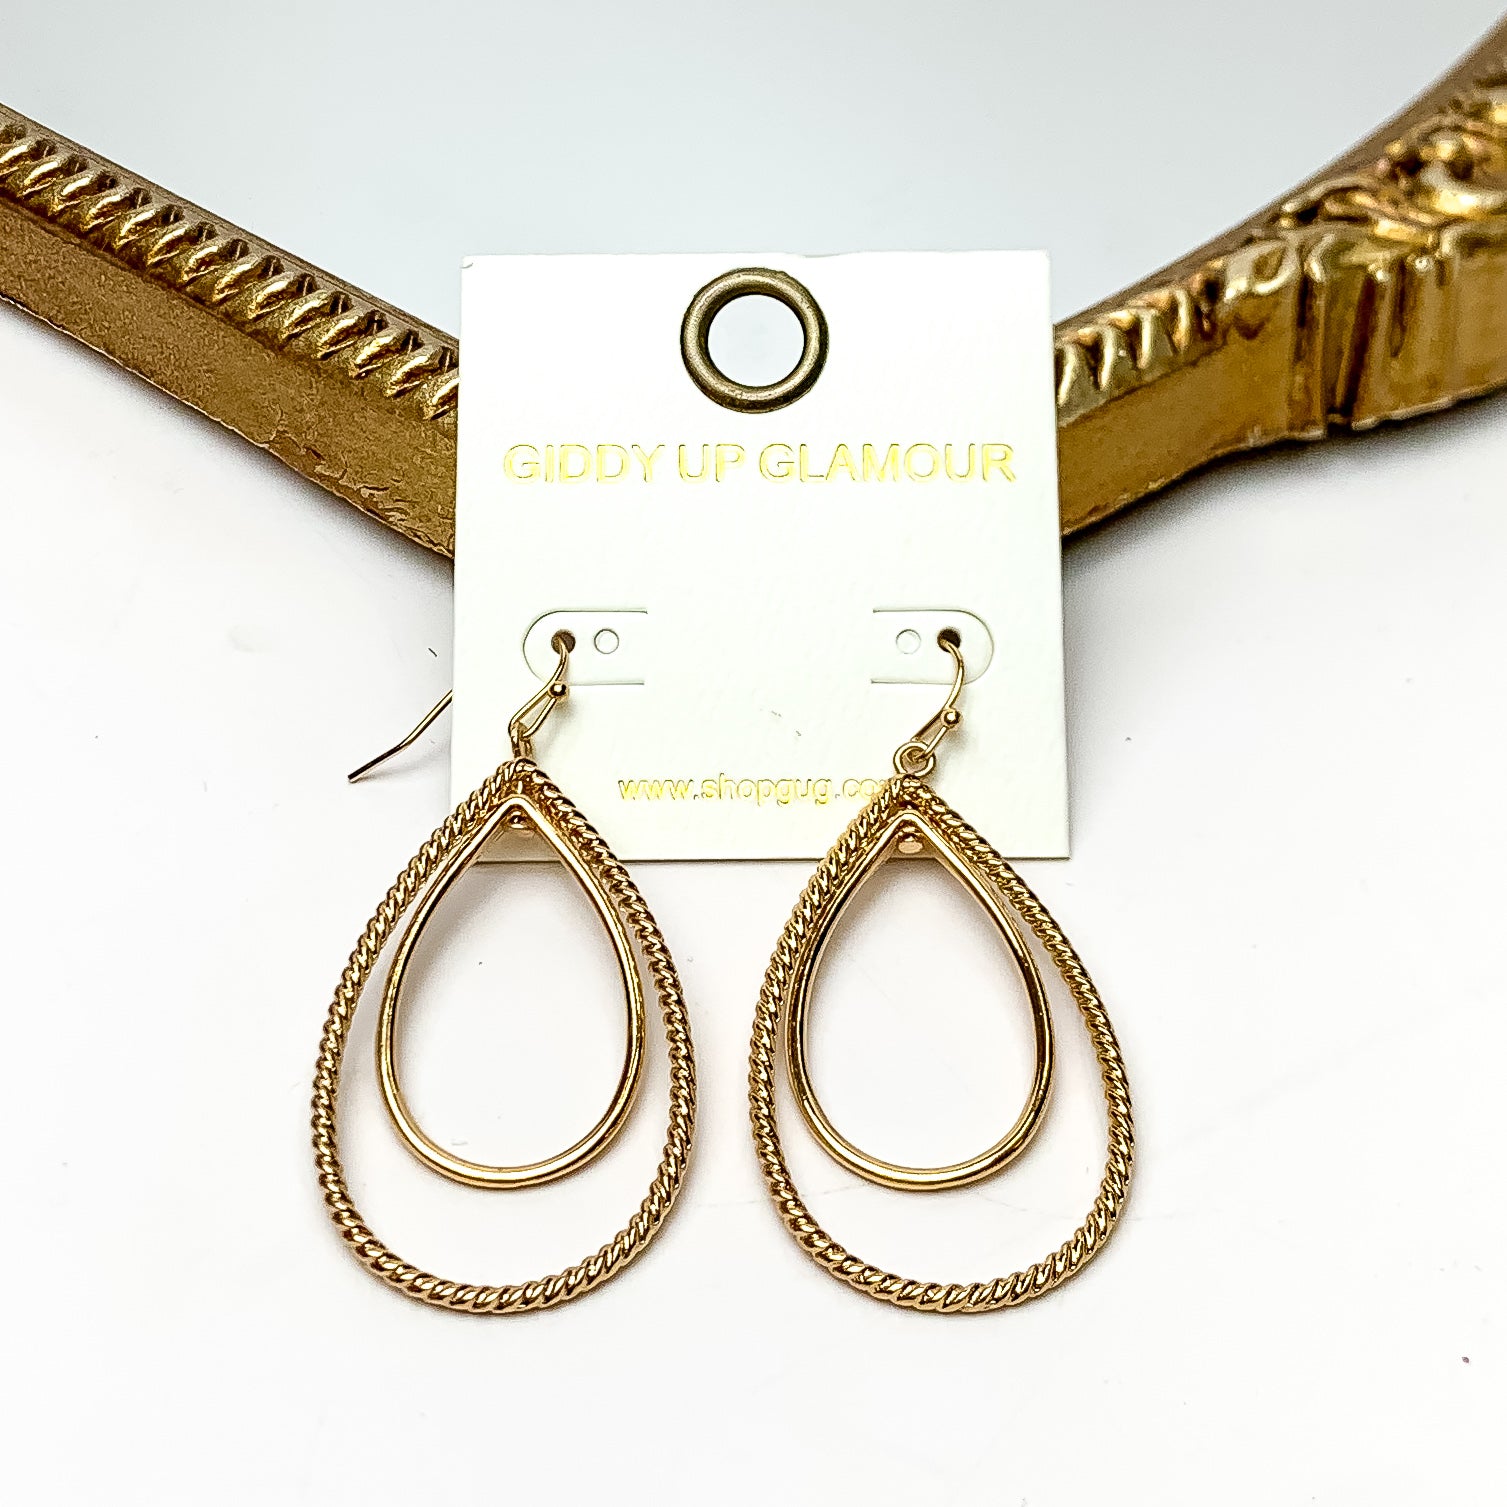 Multiple layered Teardrop Shaped Earrings in Gold Tone. These earrings are pictured on a white background with a gold frame around.